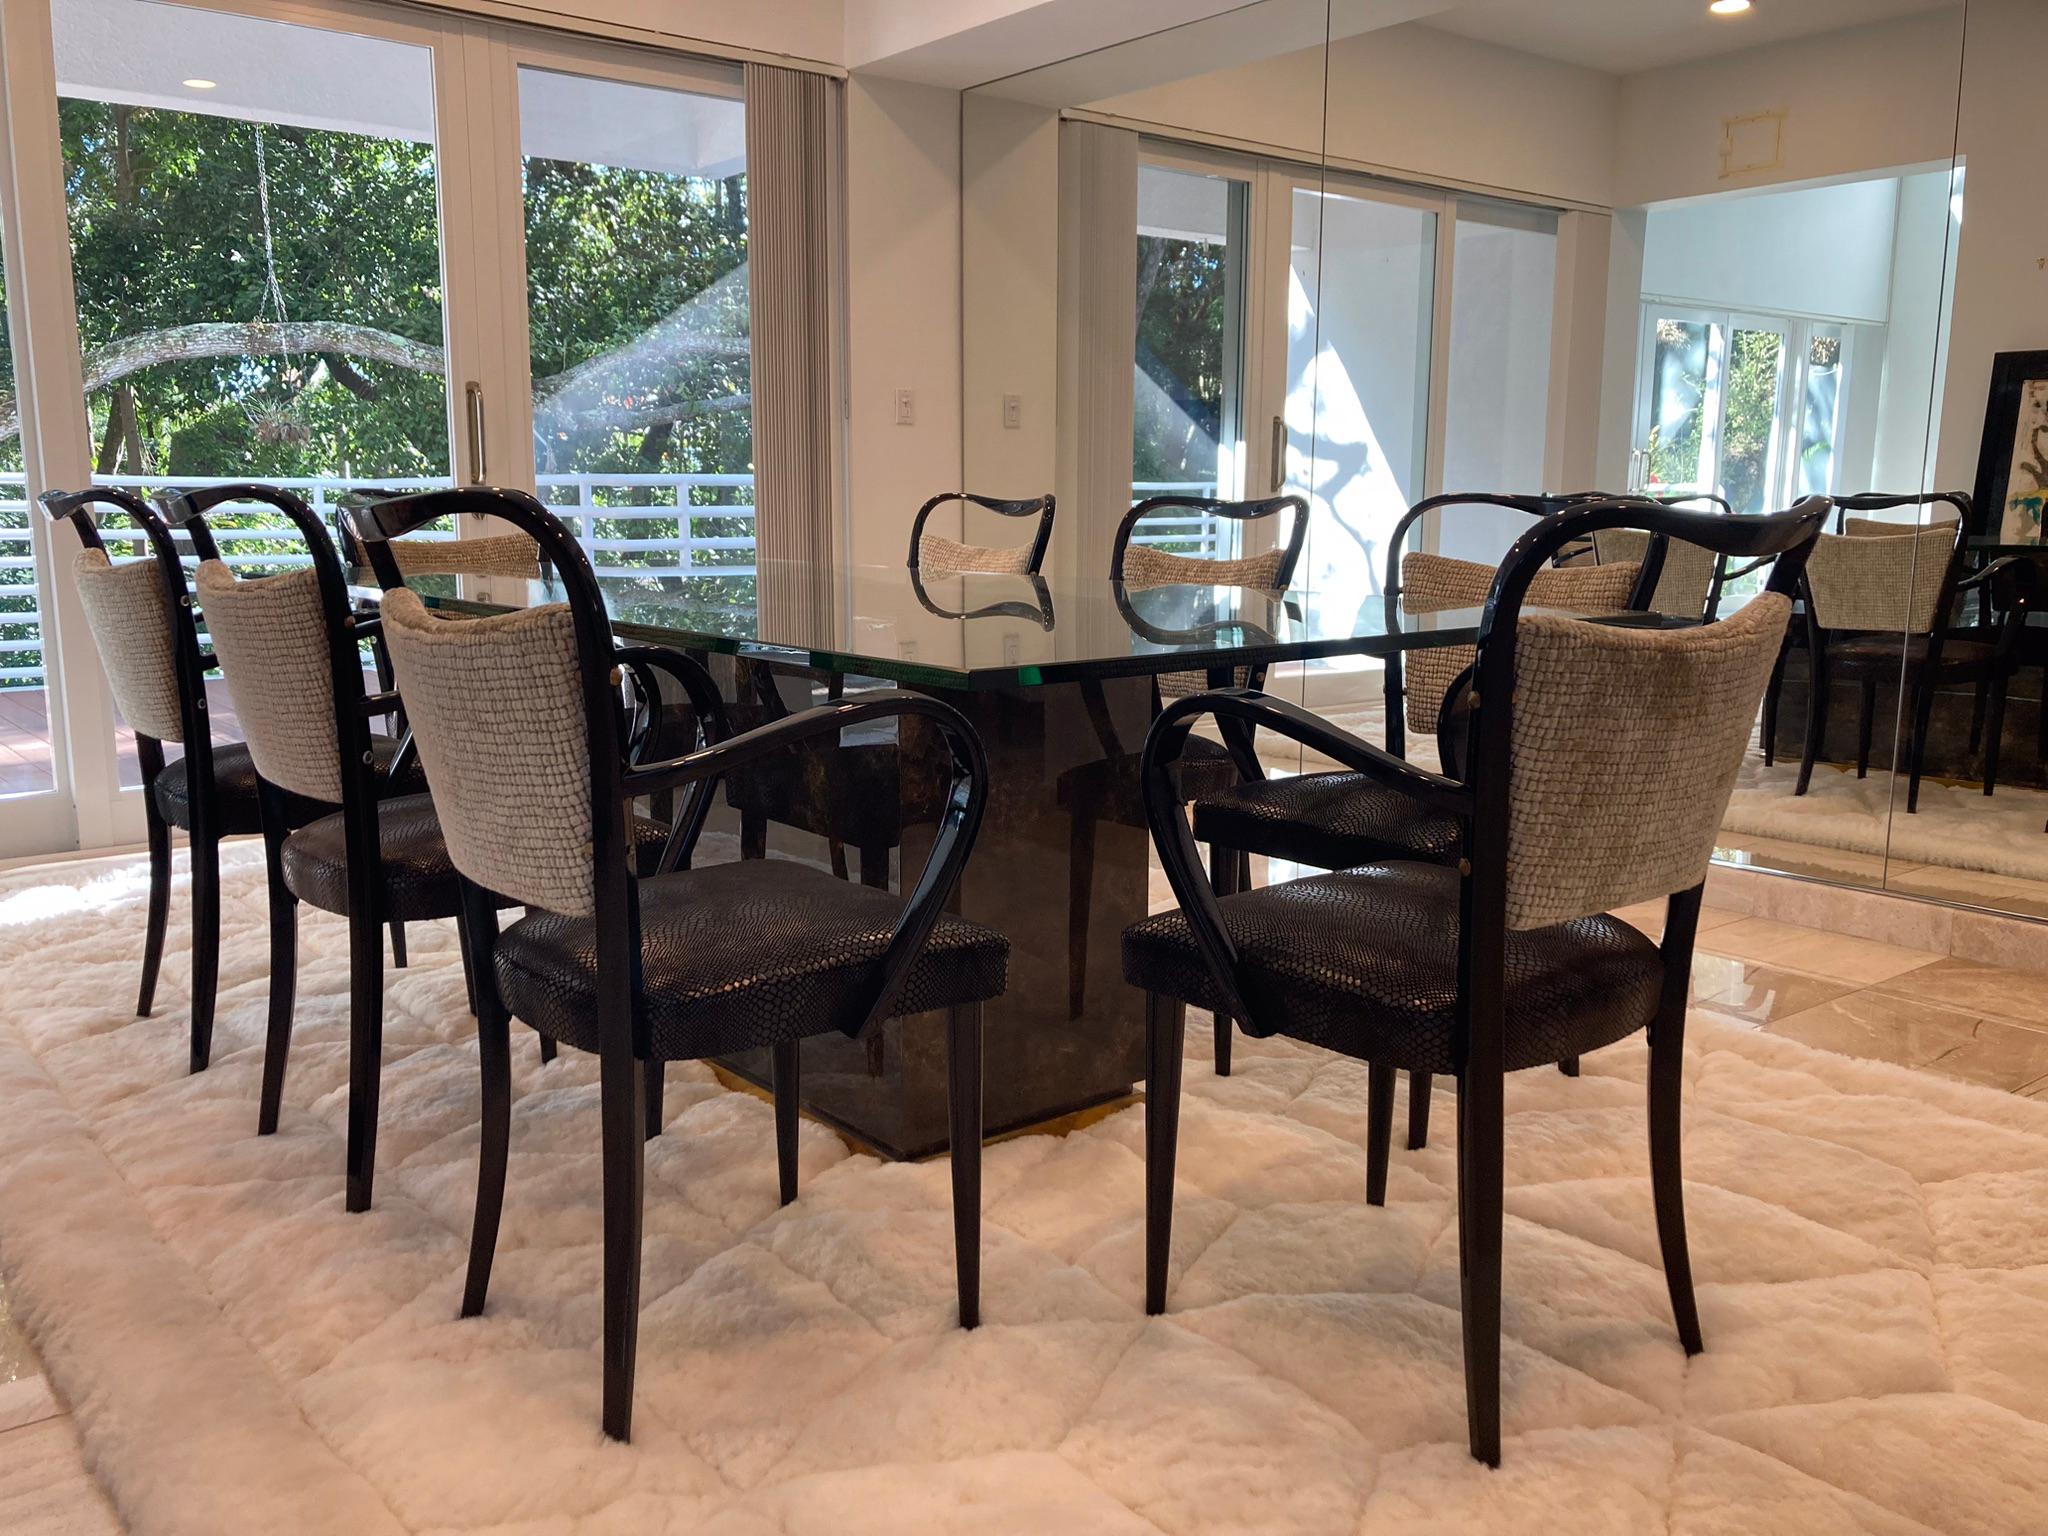 Beautiful set of eight dining chairs from the 1950s made in Italy. Black painted wood with brass hardware. Seats and backs in fabric. Ready for a new home.